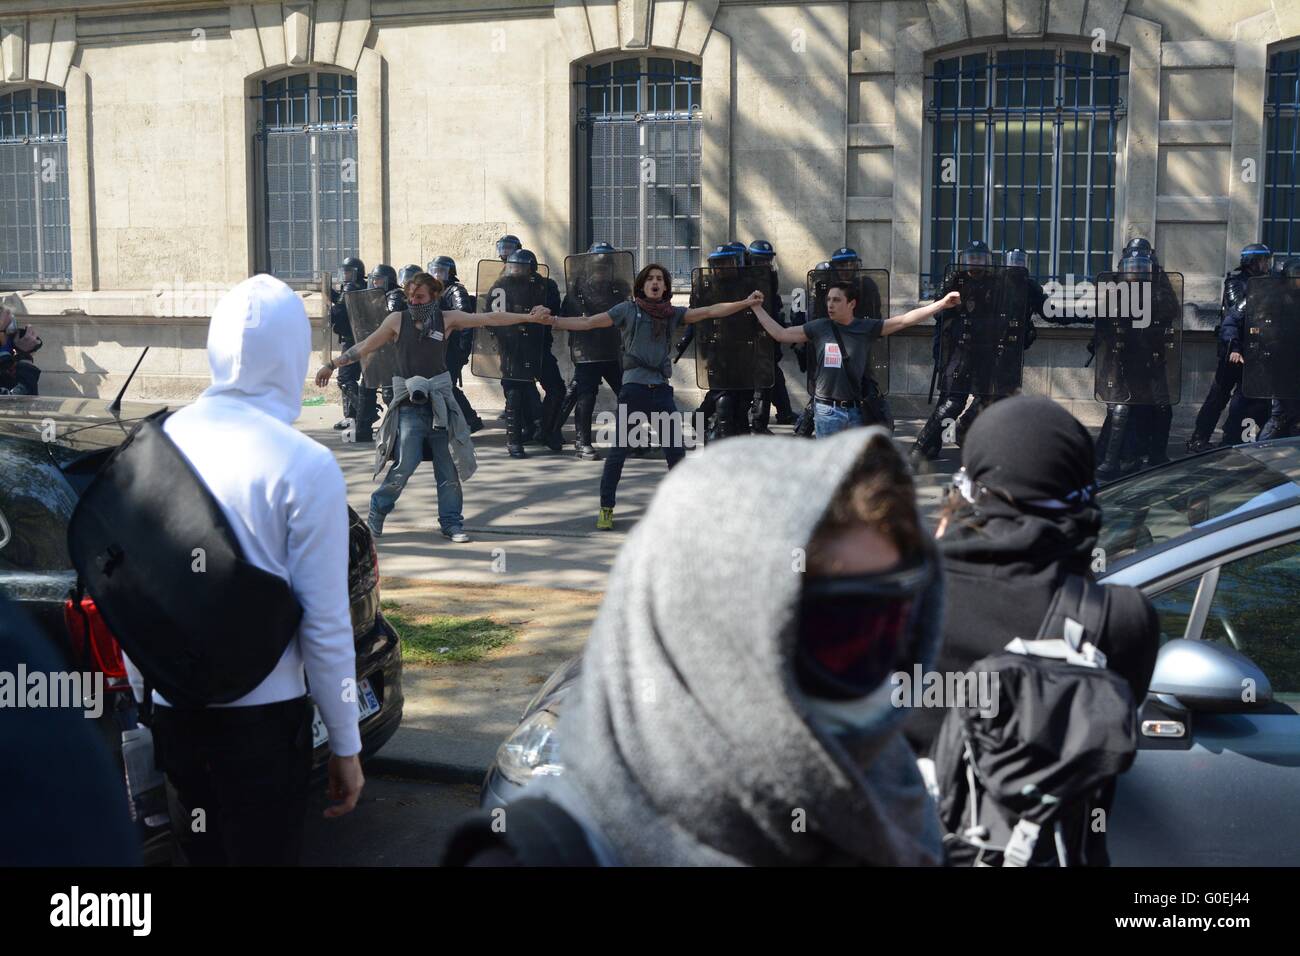 Paris, France. 1 May 2016. Some protesters formed lines to stop thrings being thrown as police moved in. Credit: Marc Ward/Alamy Live News Stock Photo